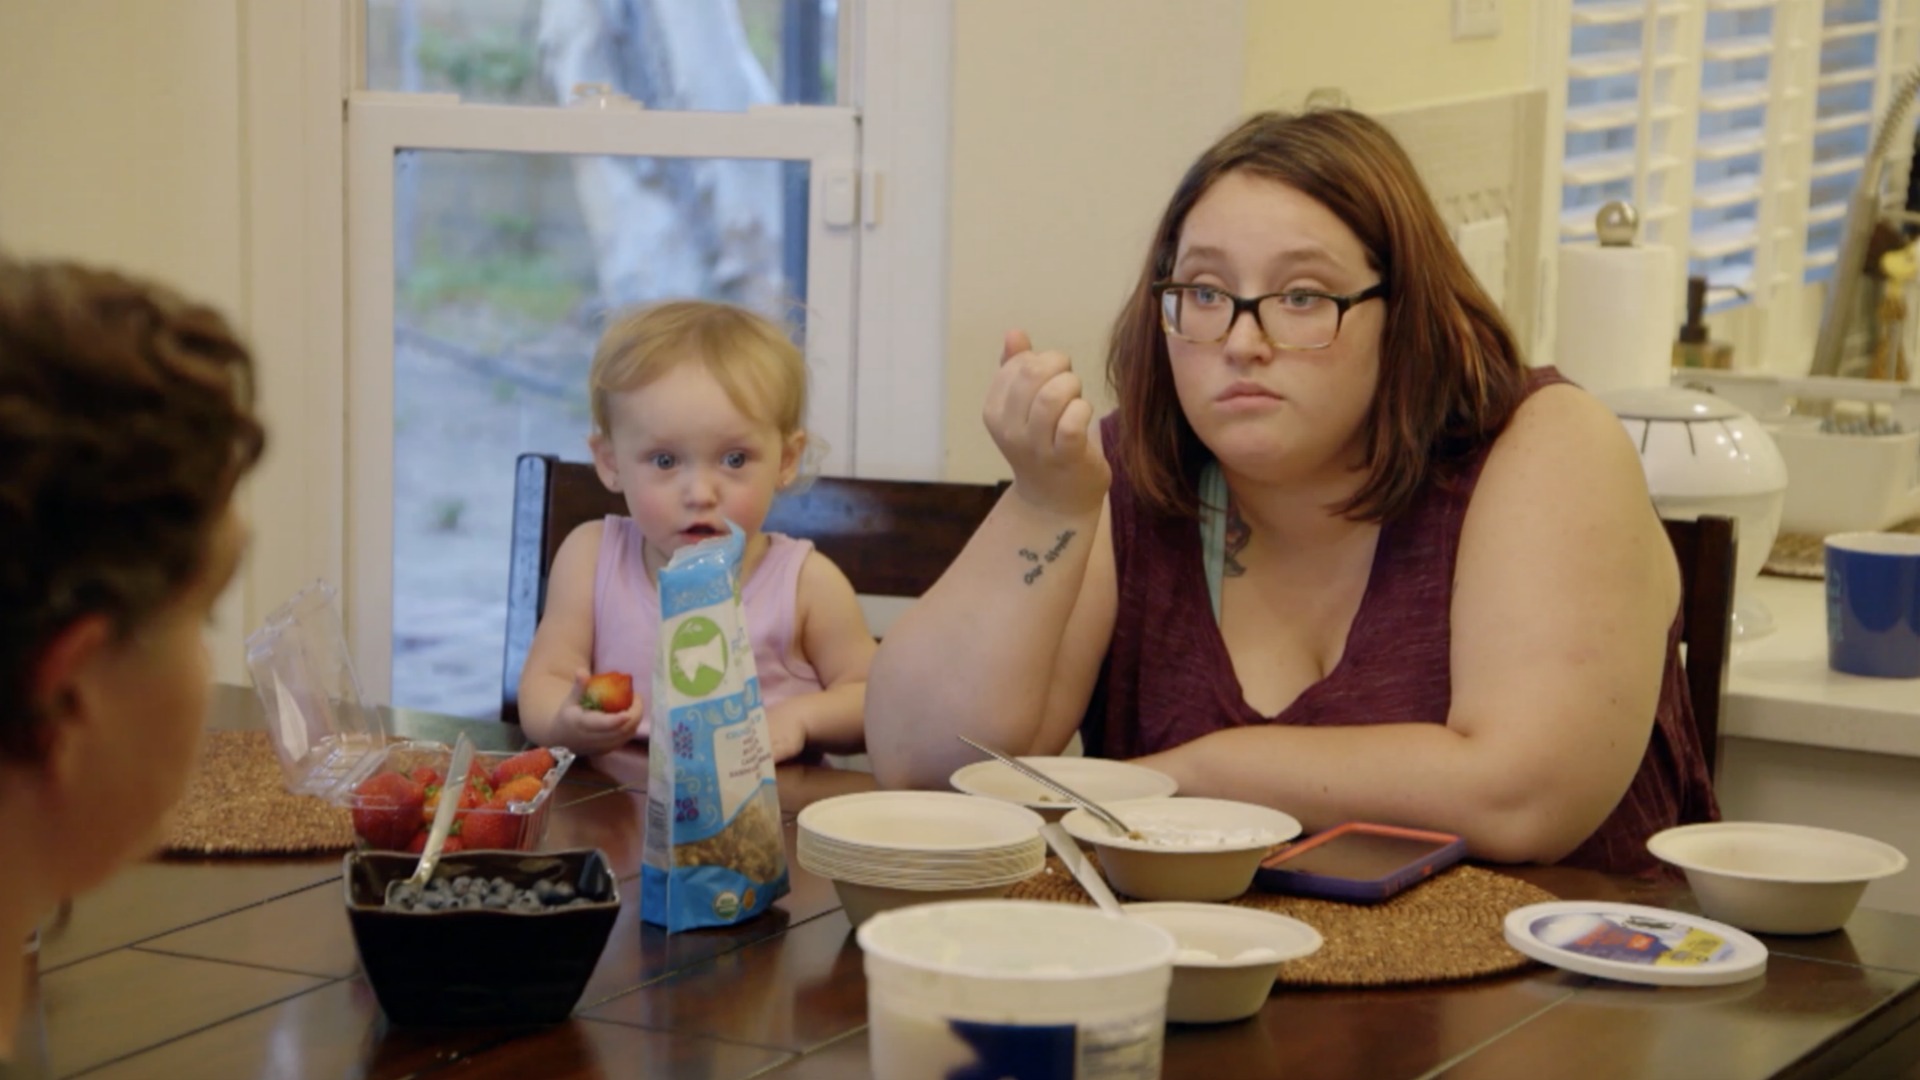 Watch Pumpkin & Jennifer Square Off! | Mama June: From Not to Hot Video Extras